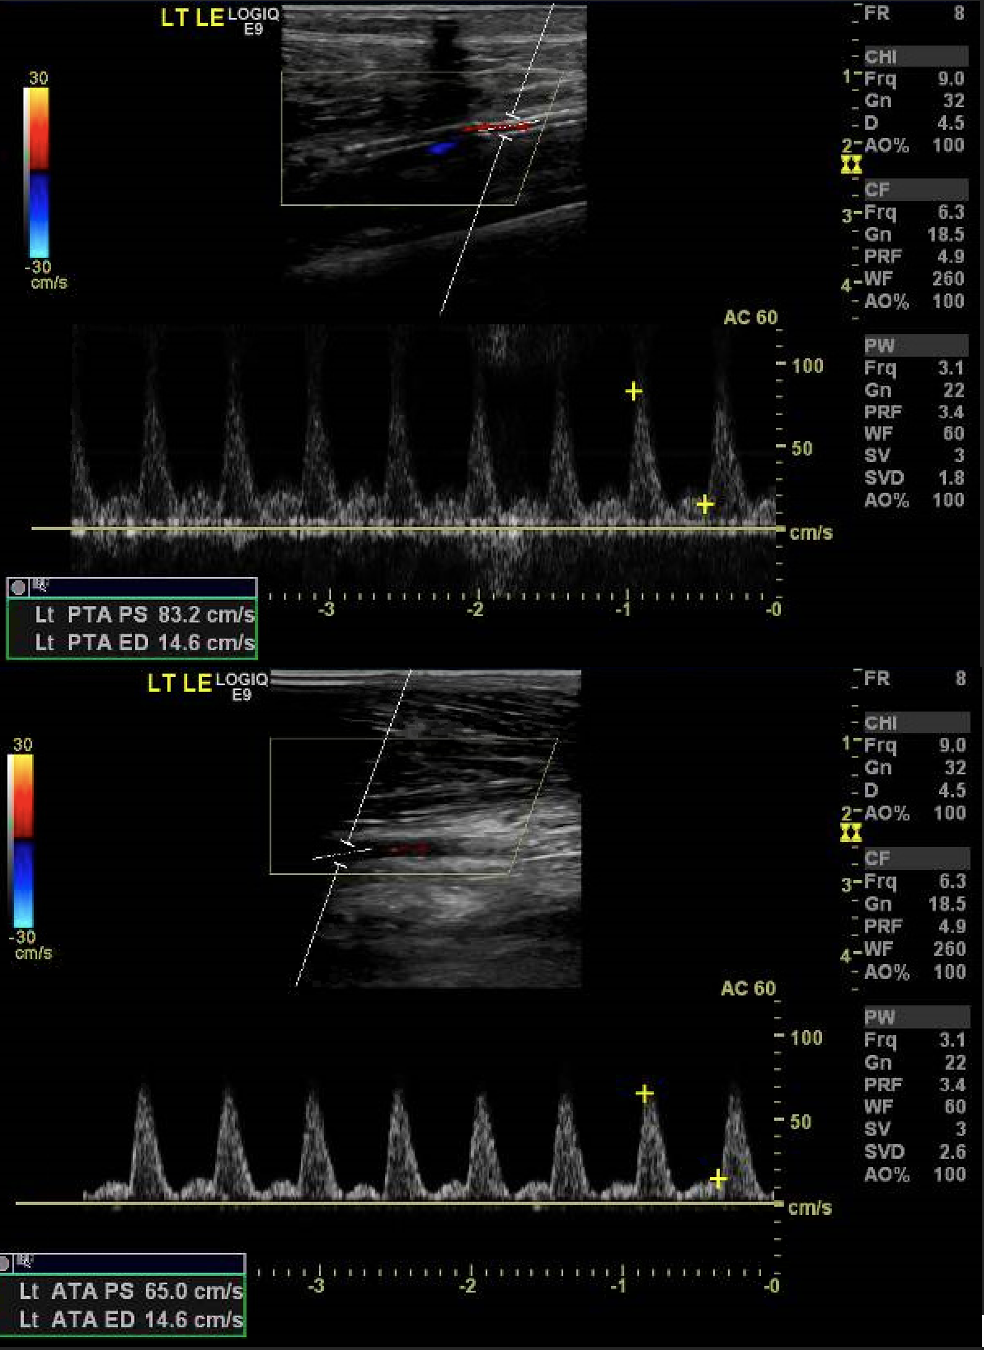 Arterial duplex ultrasound imaging of the proximal anterior and posterior tibial arteries revealed normal hemodynamic flow and a non-occlusive flow pattern.